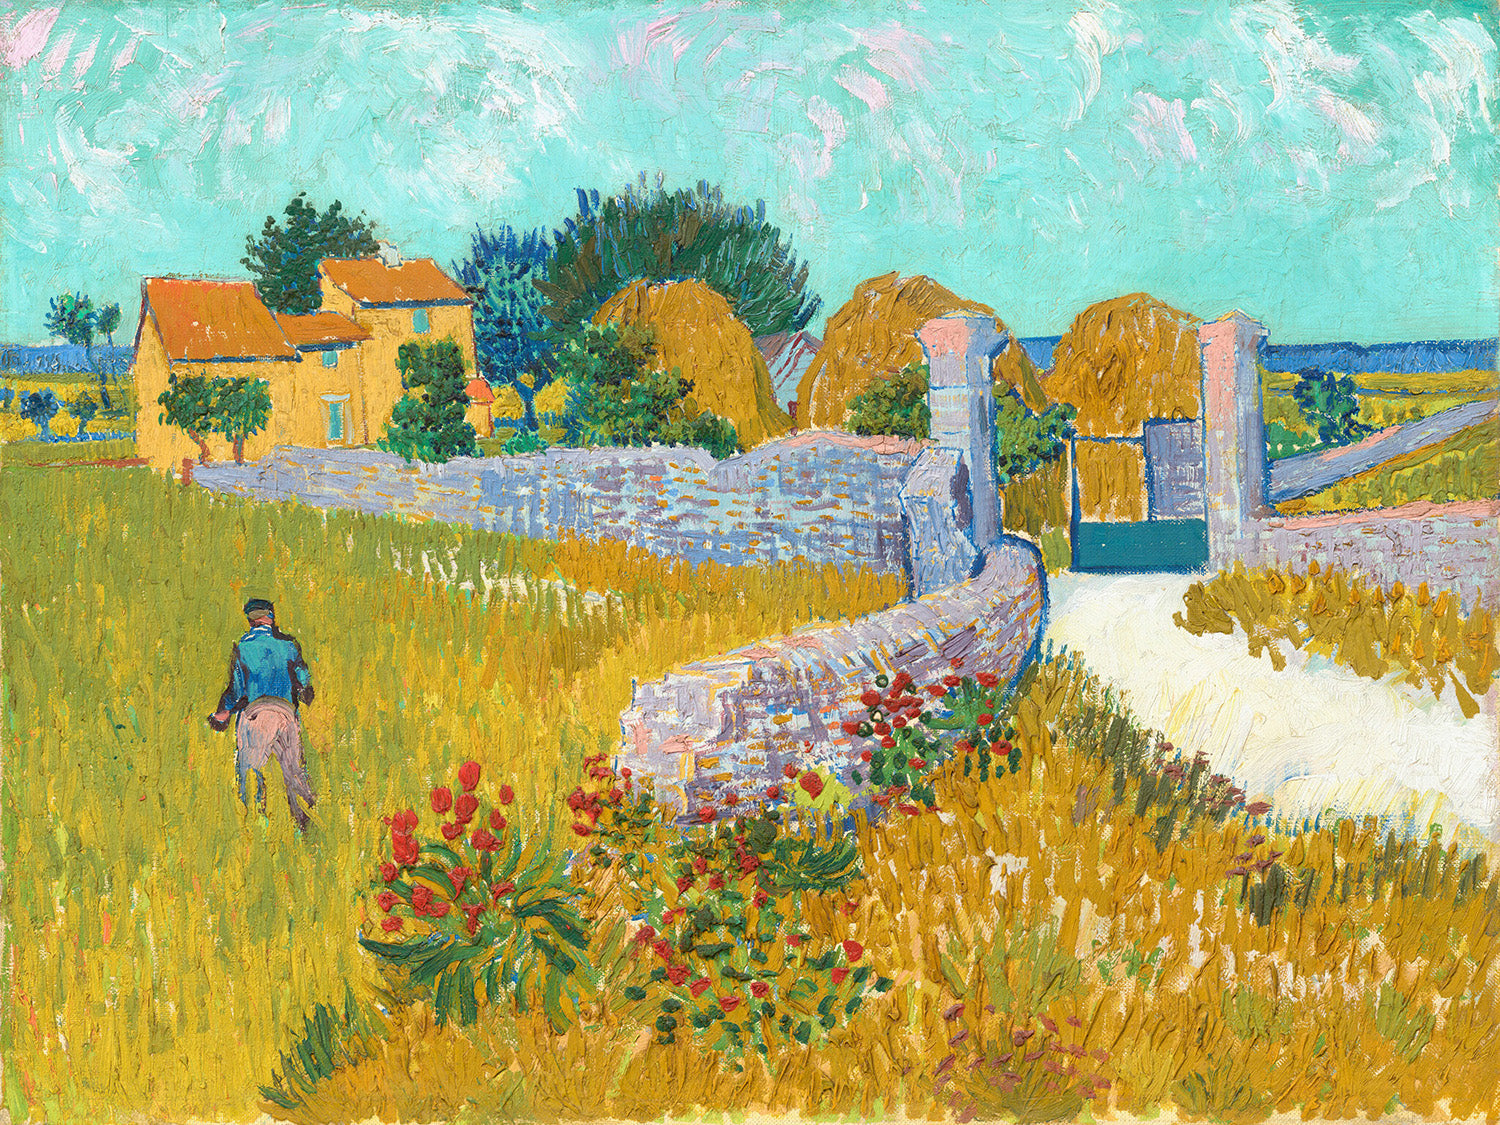 Farmhouse in Provence by Vincent van Gogh Art Print